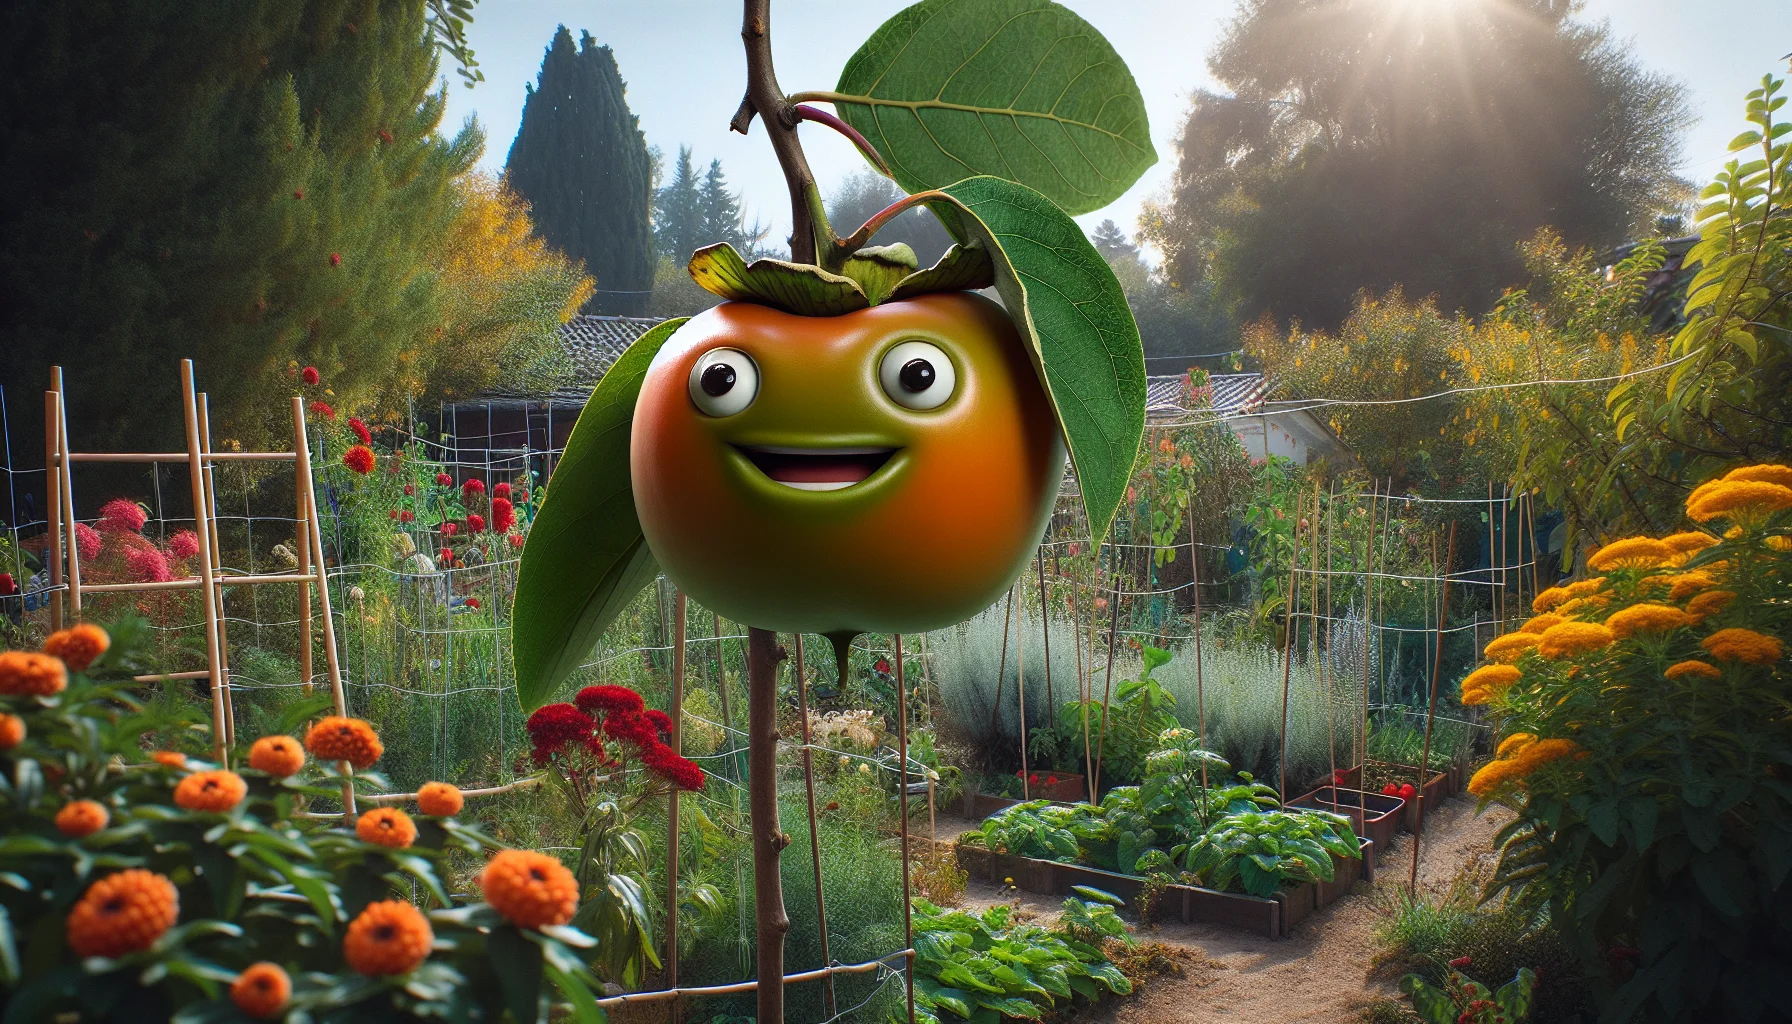 Generate a realistic image of a garden scenario. In the foreground, an unripe persimmon with a humorous expression, as if it's telling a joke, hanging from its tree. The persimmon tree is located amidst an abundant garden, with a variety of plants and flowers blossoming, reinforcing the allure of gardening. The atmosphere is bright and sunny, with a clear blue sky overhead. The scene may also include a garden tool or two subtly placed, signifying the gardening work. All these elements should collaborate to compel viewers to enjoy the concept of gardening.